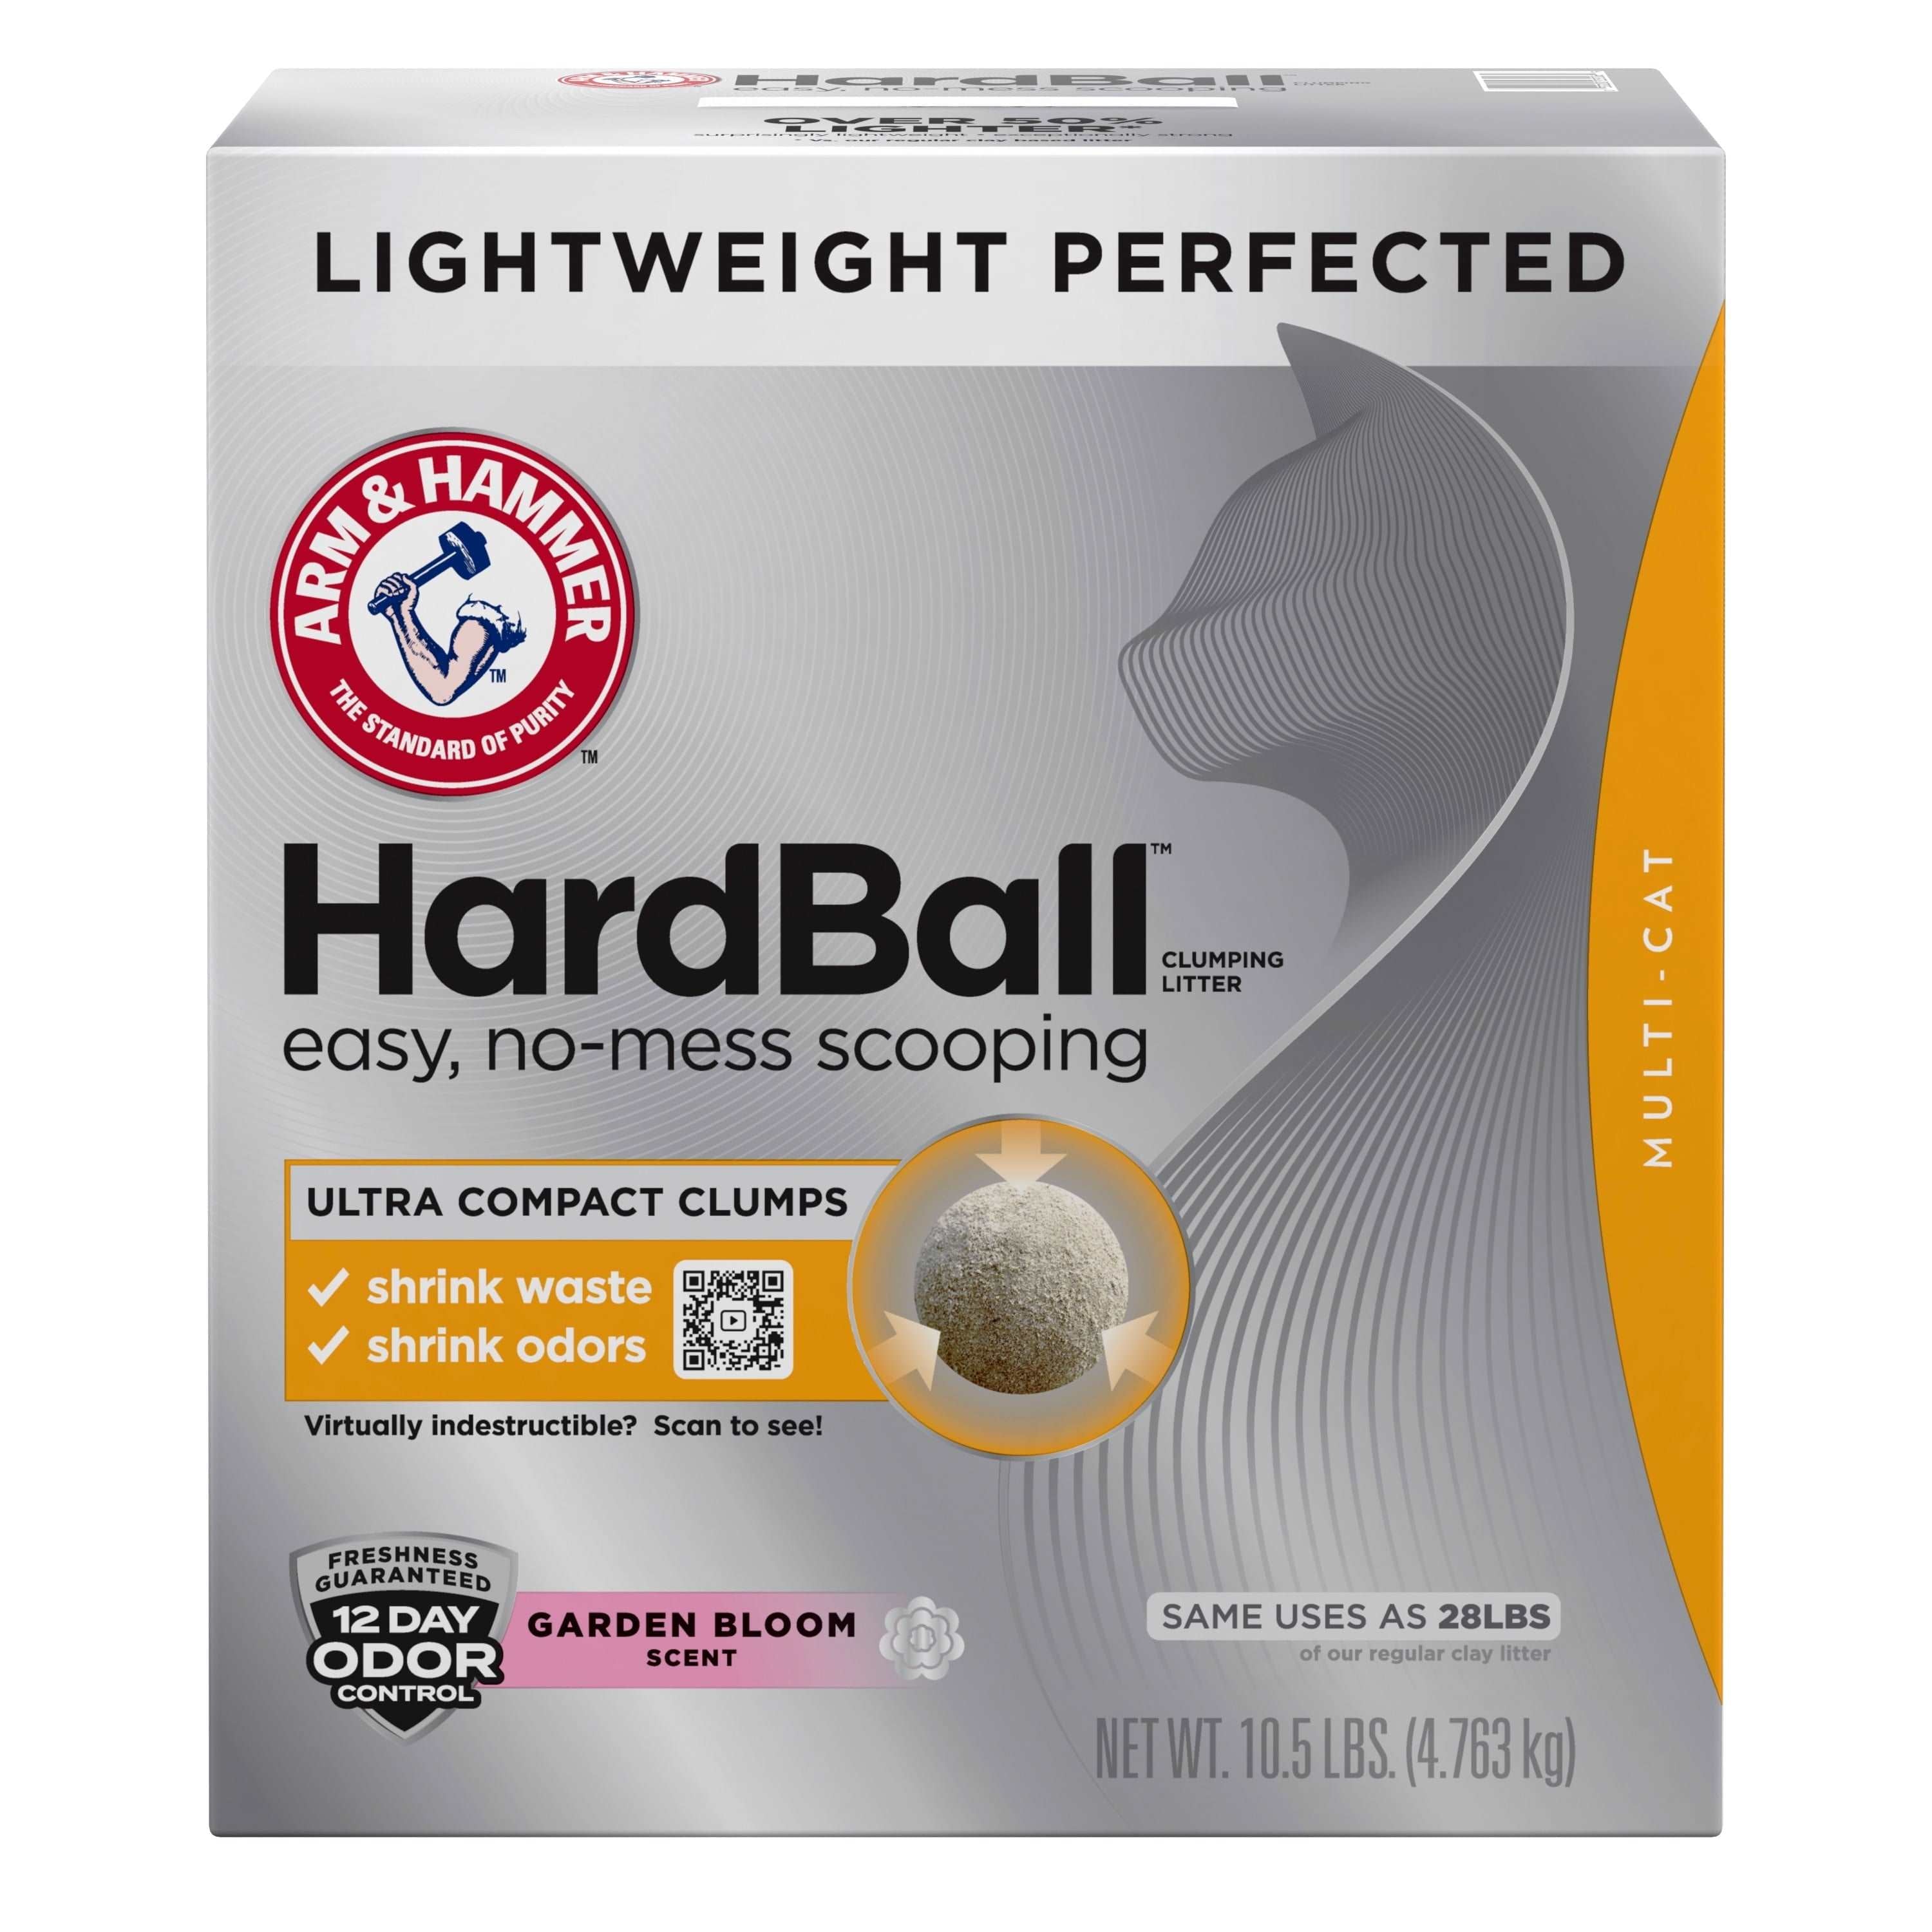 Wholesale prices with free shipping all over United States Arm & Hammer Hardball Lightweight Easy No-Mess Scooping Garden Bloom Scent Multi-Cat Clumping Litter, 10.5lb - Steven Deals